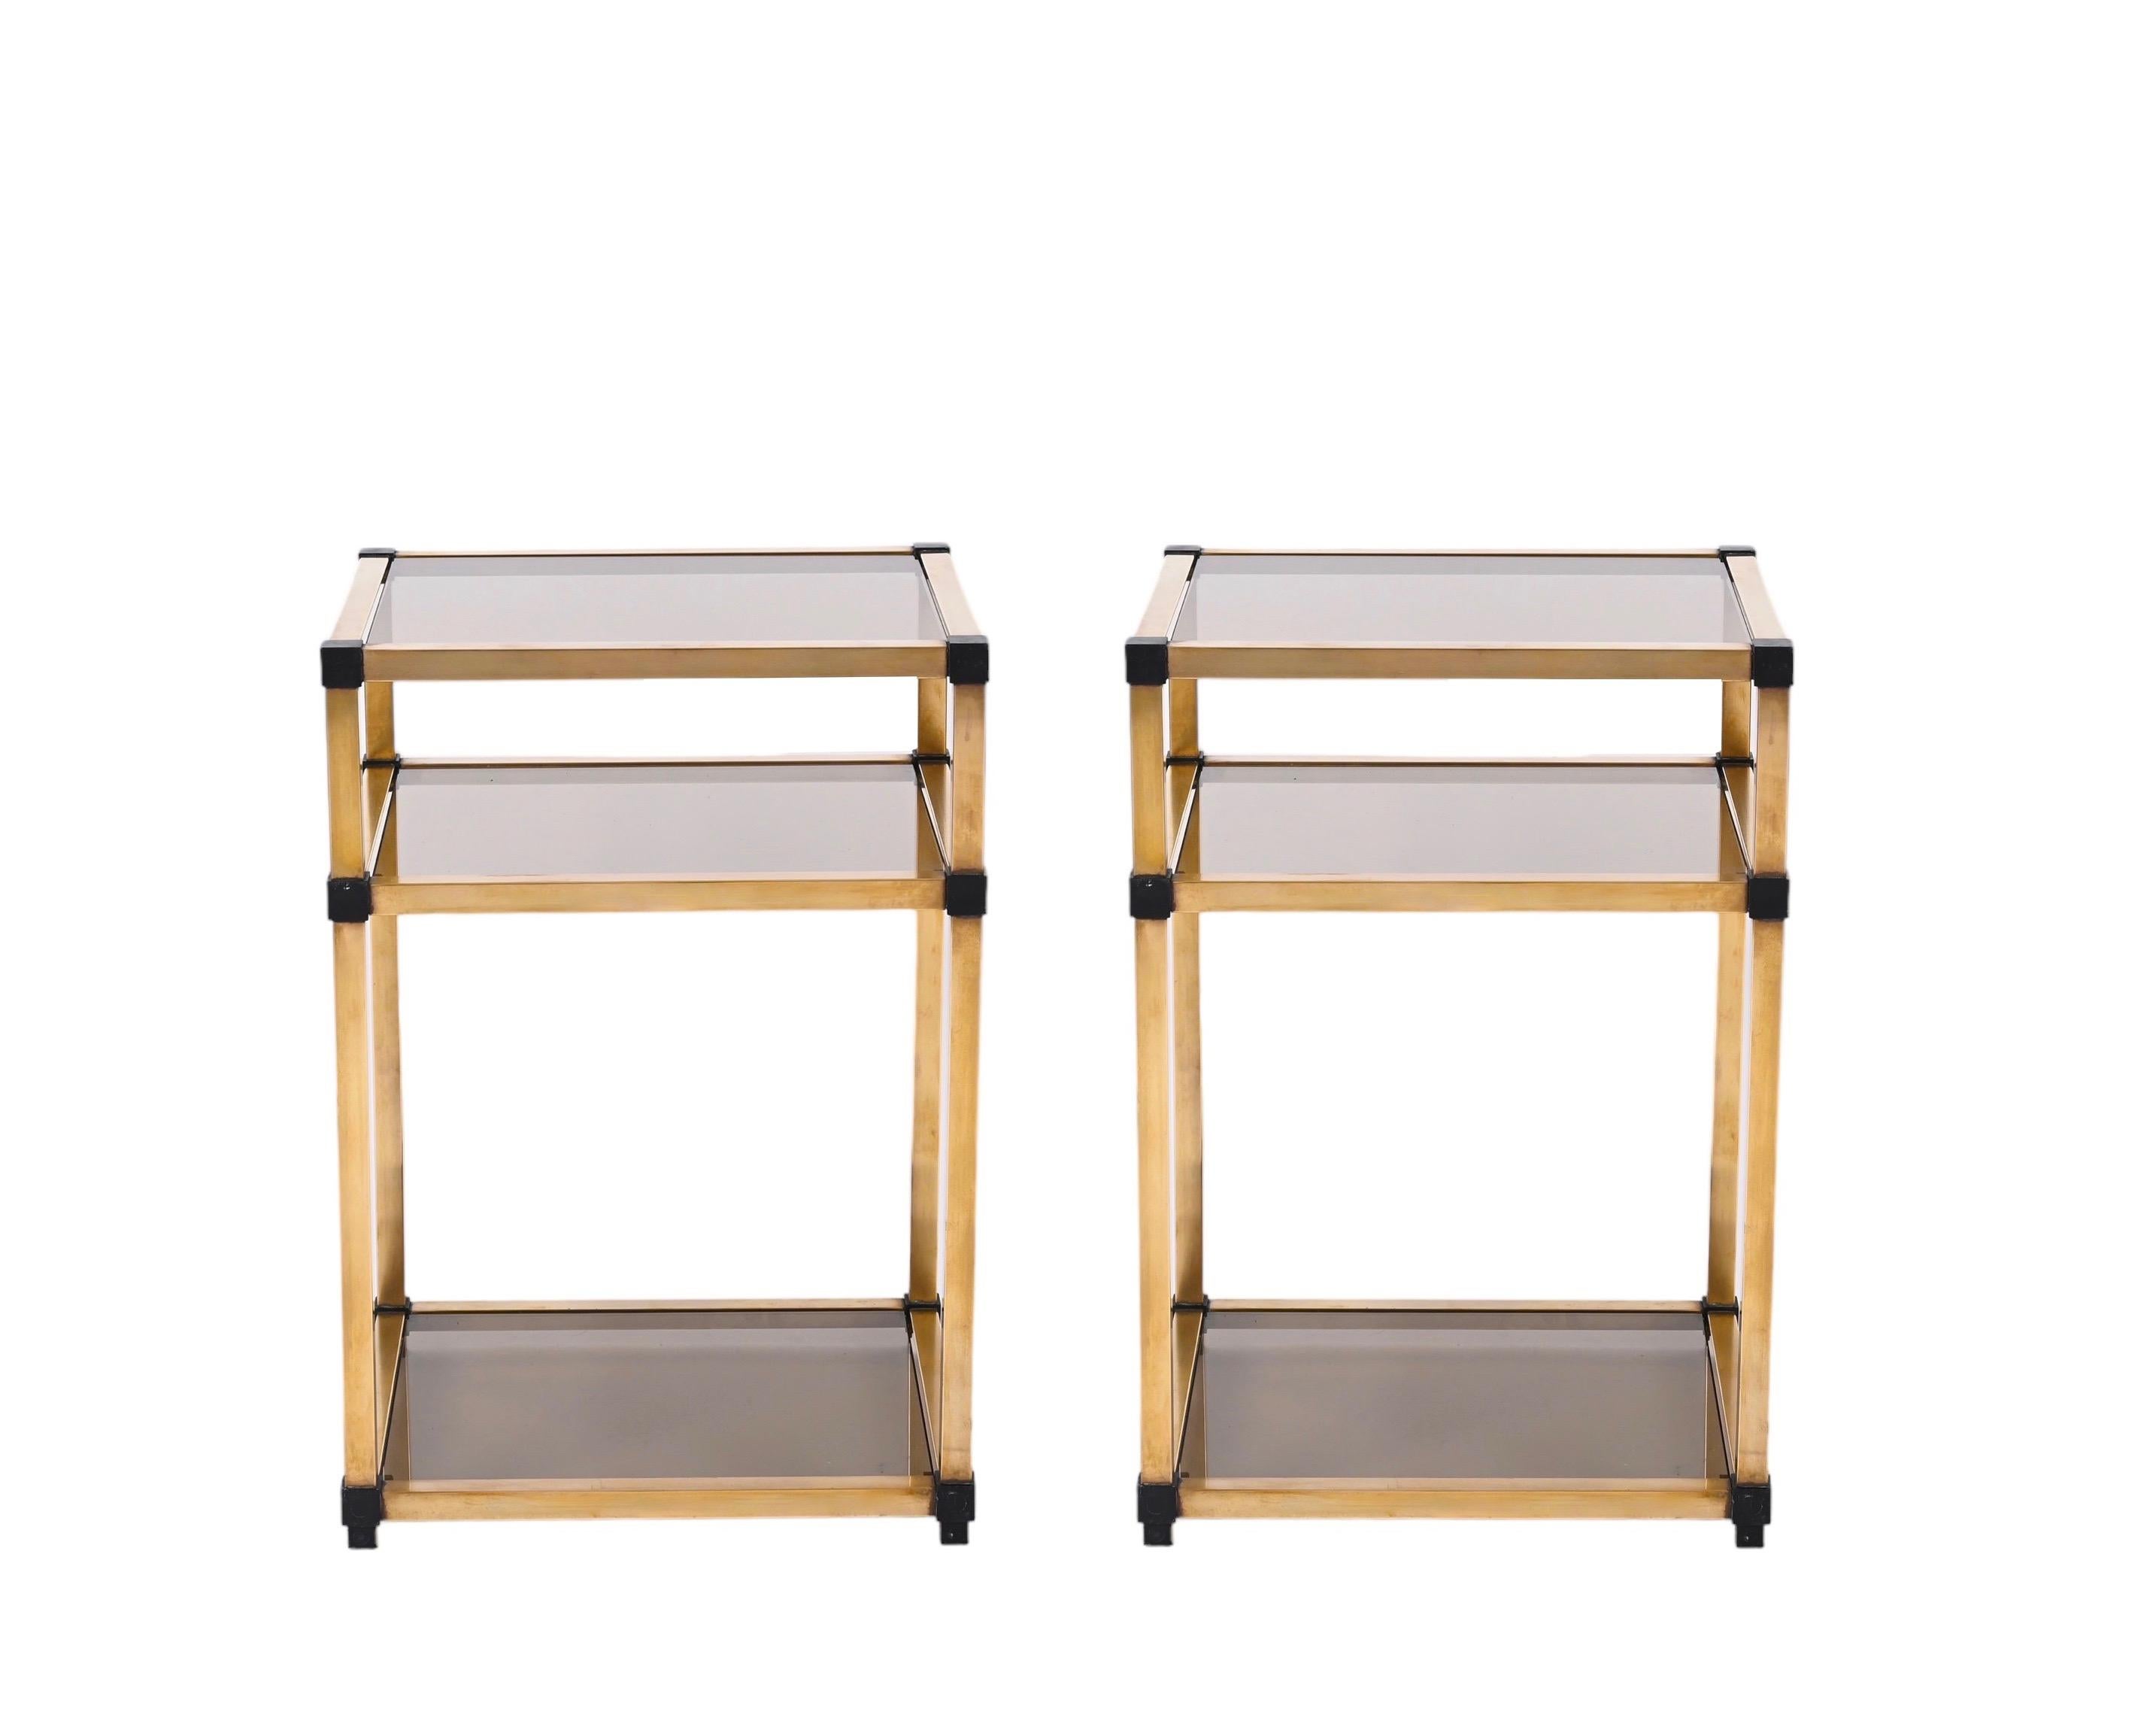 Gorgeous pair of Mid-Century Modern brass and smoked glass Nightstands, designed in Italy in the 70s.
These stunning bedsides feature a structure made in brass with black enameled corners and 3 shelves with smoked glasses. An incredibly elegant